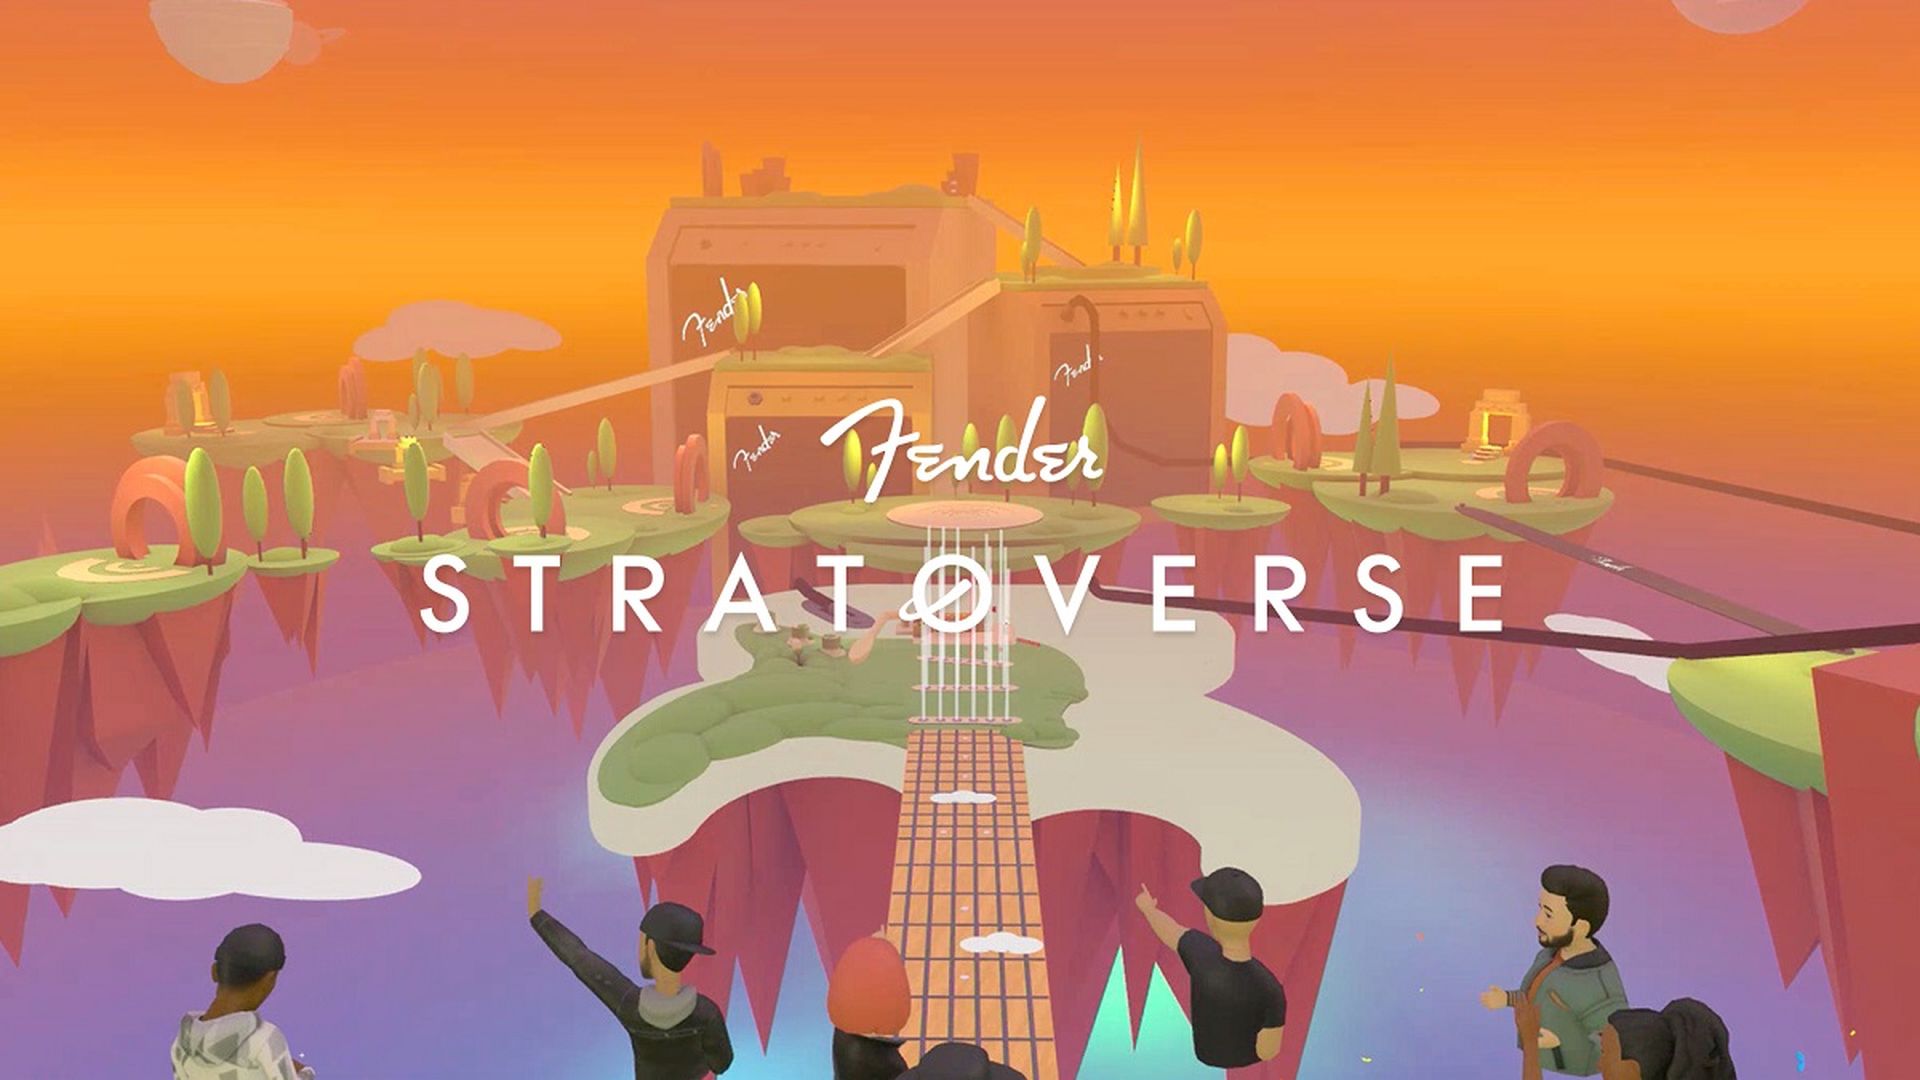 In this article, we are going to be covering the Fender Stratoverse, a new "miniverse" that is part of Meta's Horizon Worlds metaverse project.